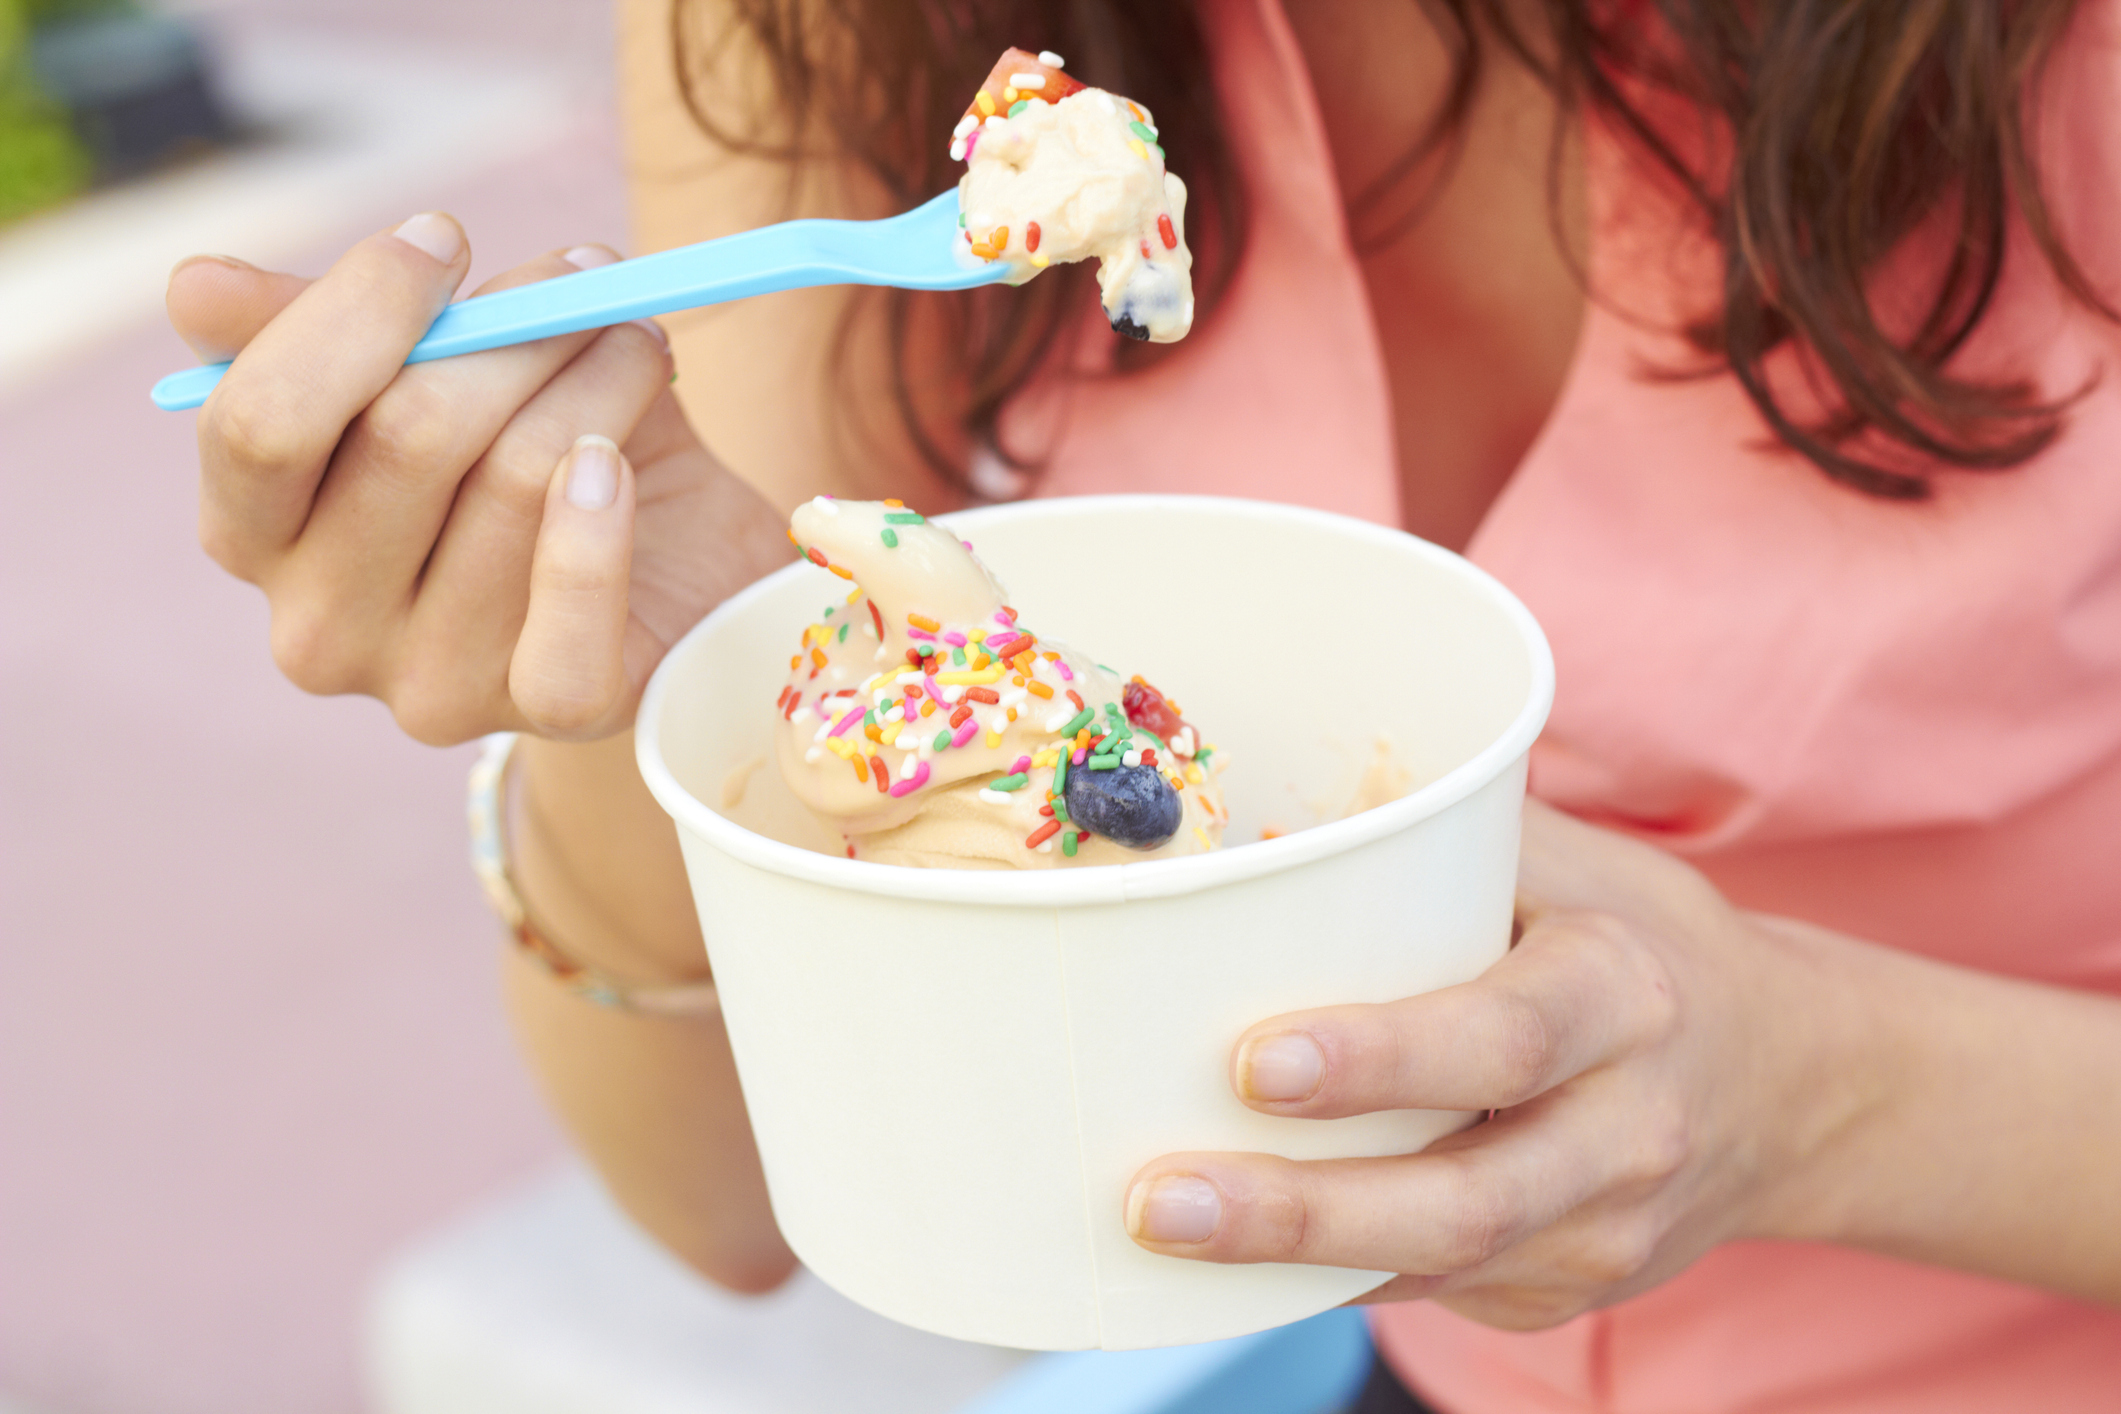 Cool Off With the Best Plano Frozen Yogurt in West Plano Village